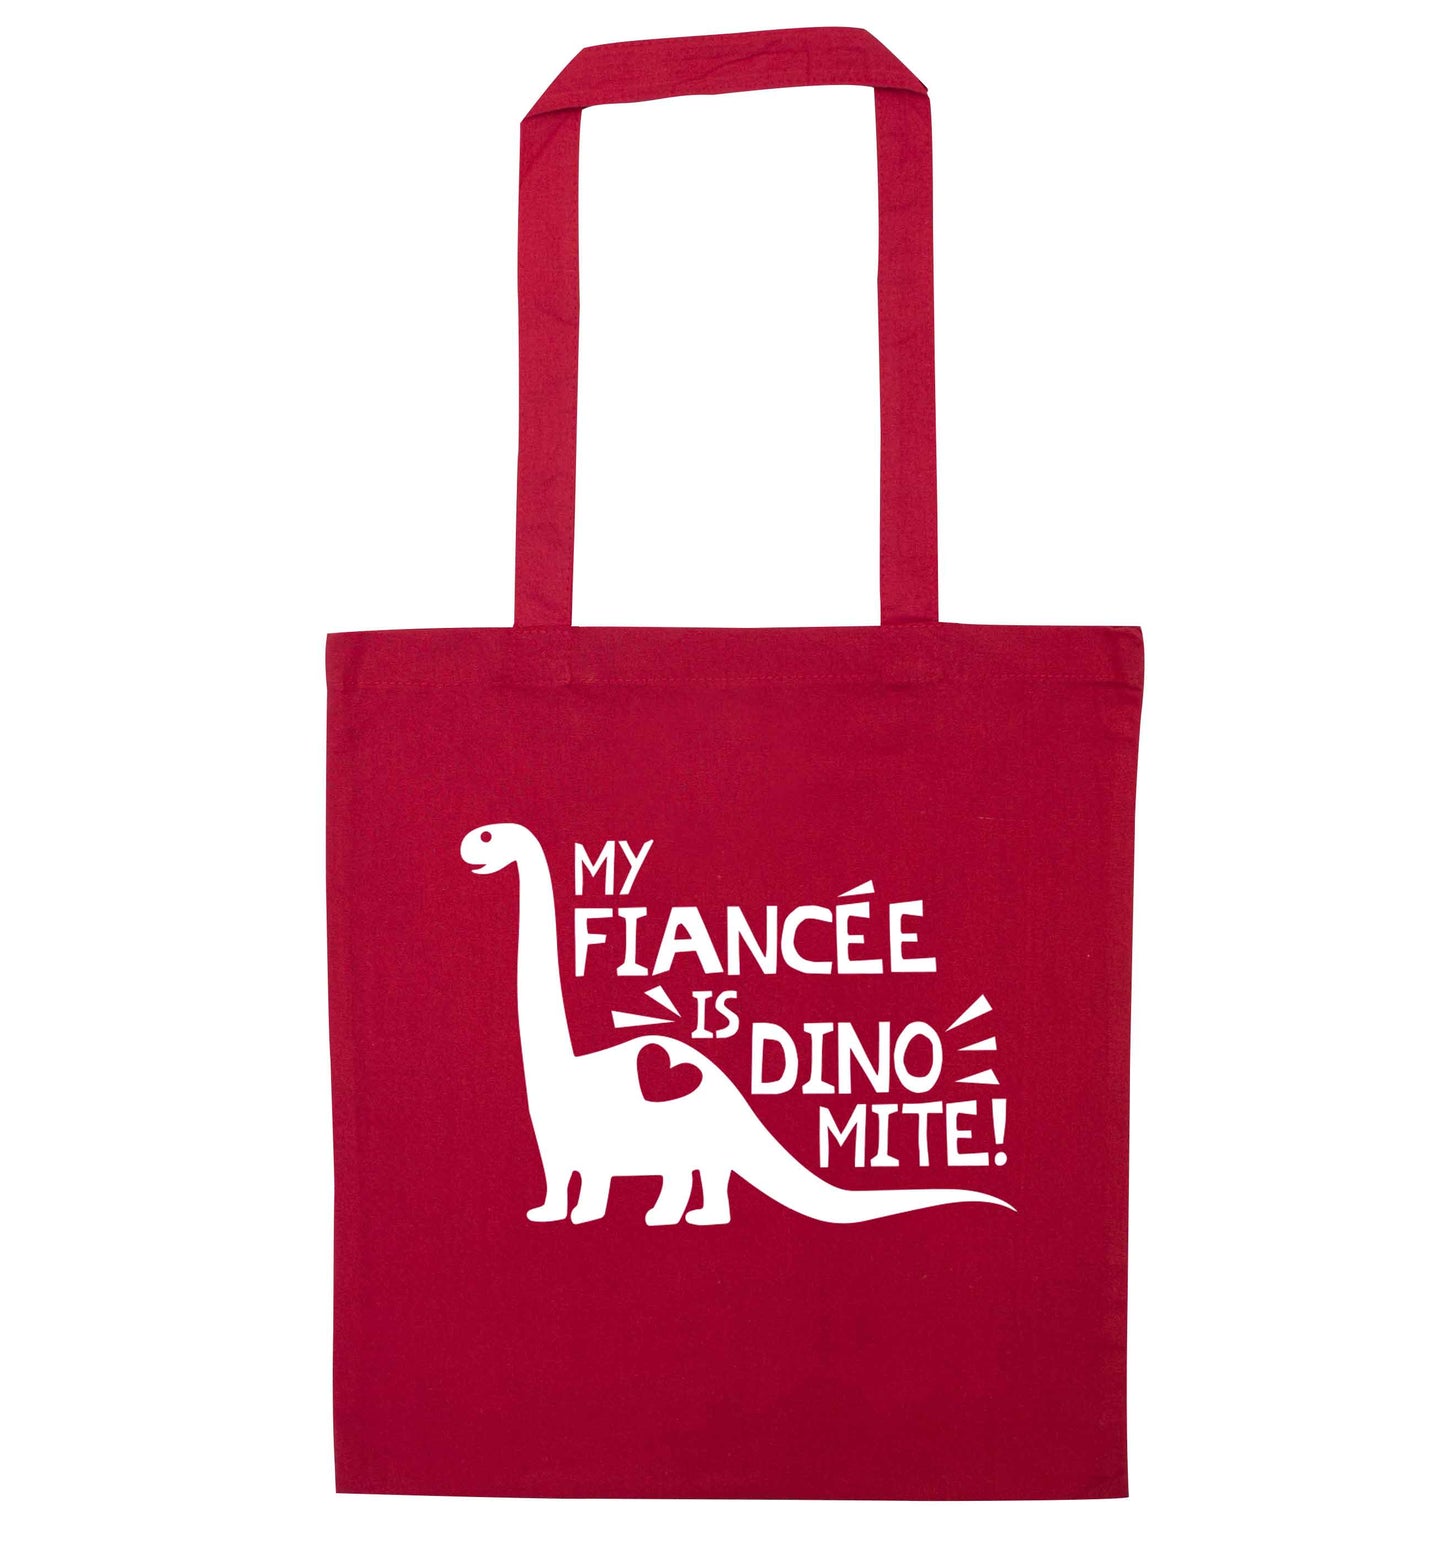 My fiancee is dinomite! red tote bag